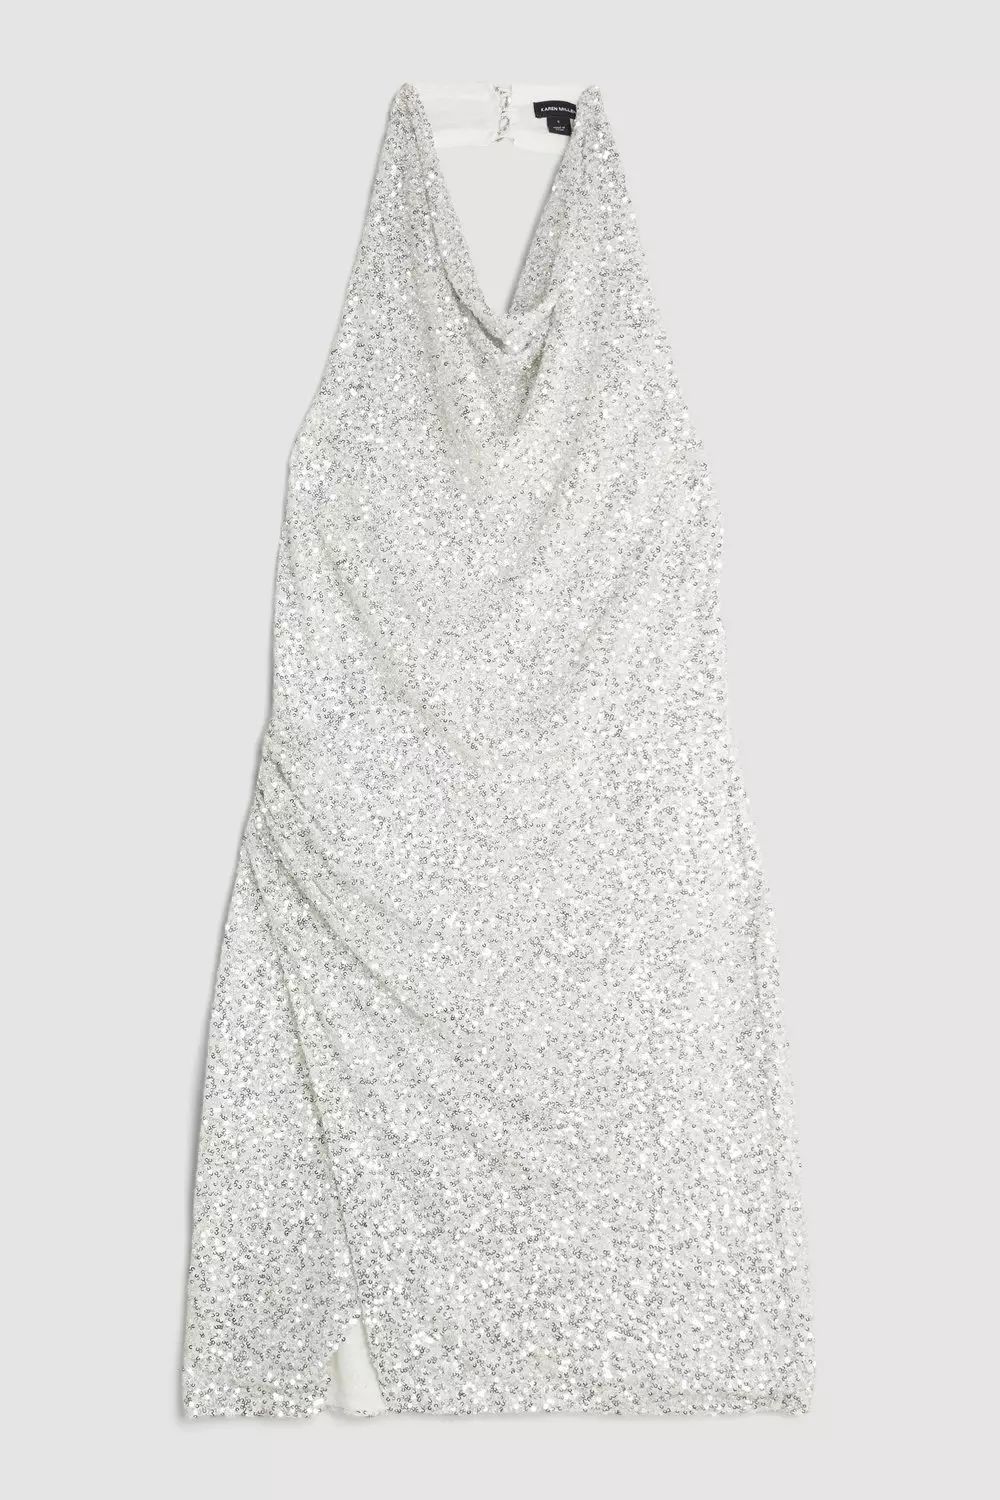 Buy RSVP by Nykaa Fashion Silver Sequin Cowl Neck Criss Cross Back Mini  Bodycon Dress online